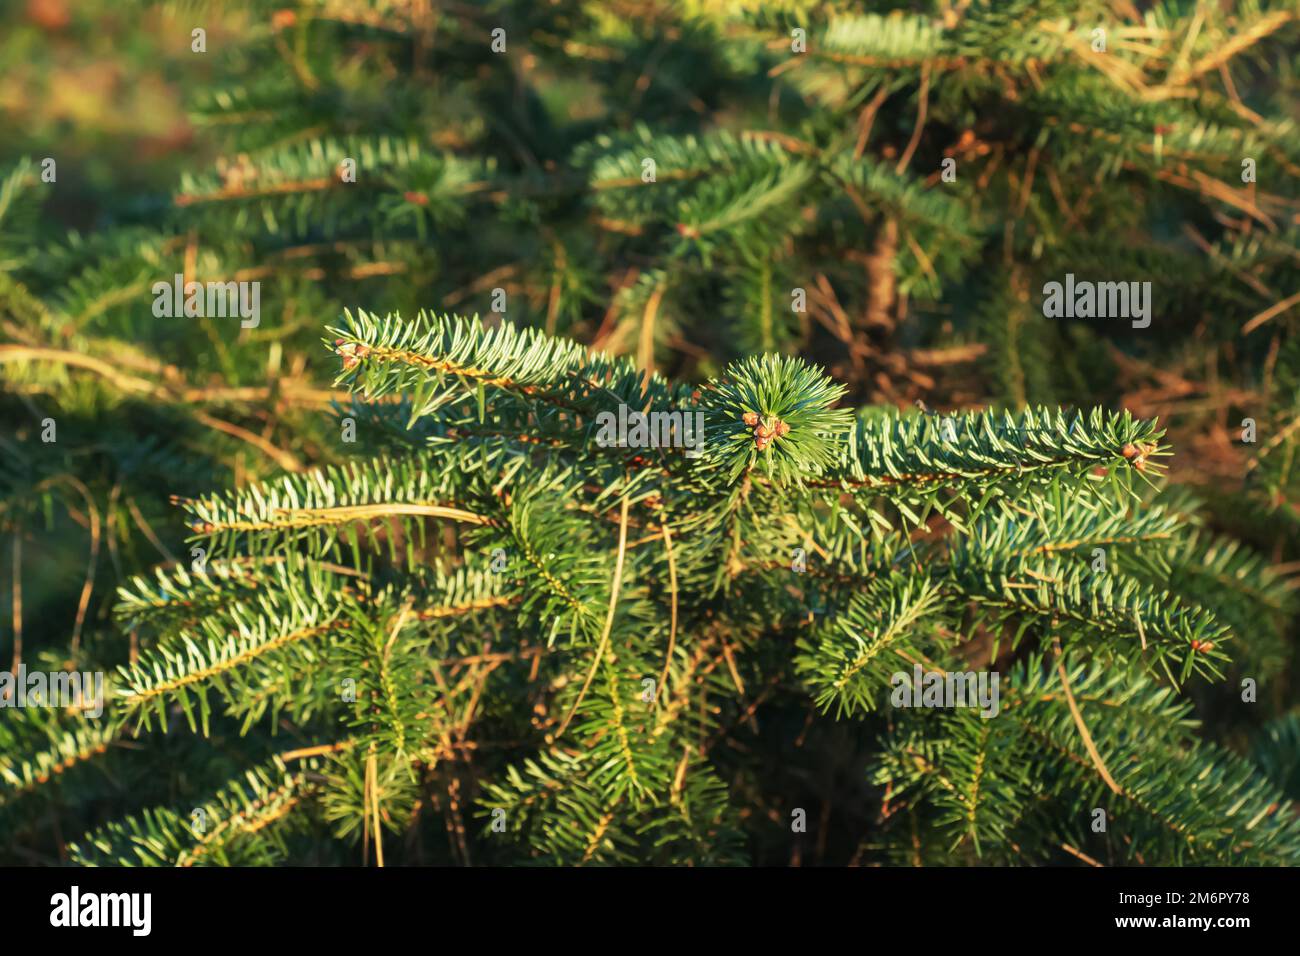 Branches of Greek fir, Abies cephalonica on a blurred background. The image shows the leaves of a young Greek fir. Stock Photo